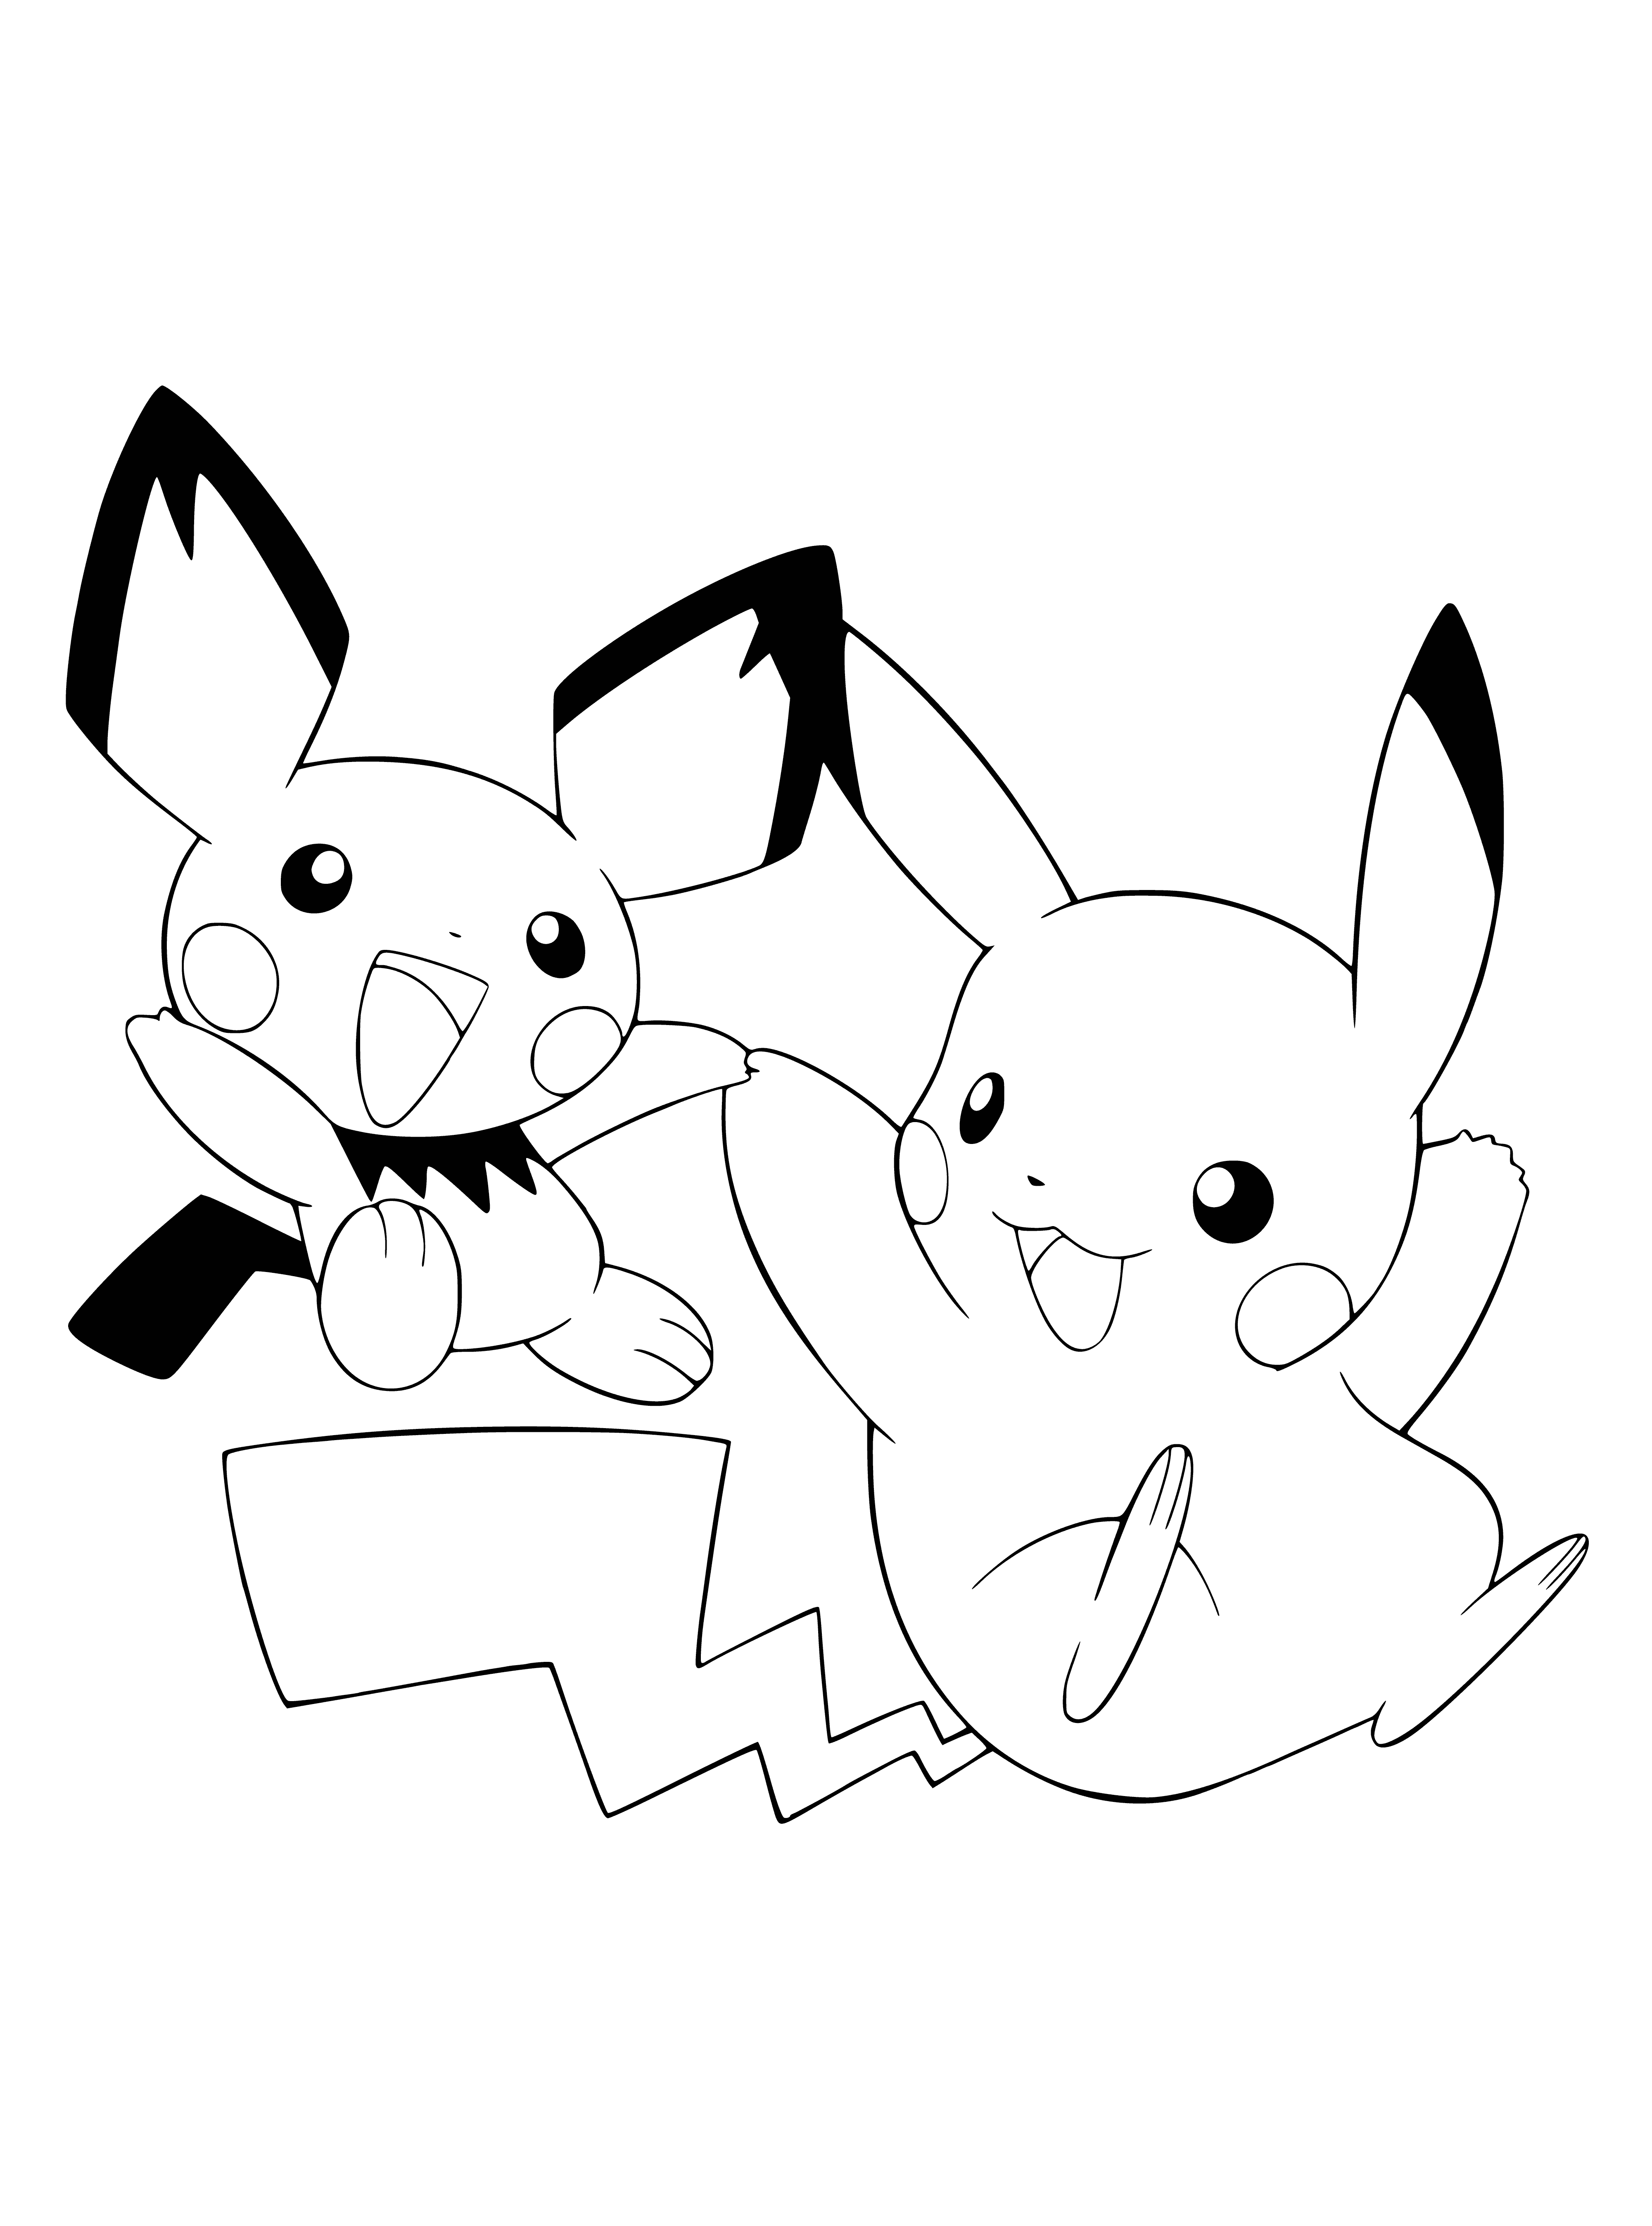 coloring page: Pikachu is a popular, small, yellow Pokemon with black stripes, pointed ears & red circles on the cheeks. It's very cute & one of the most beloved Pokemon!